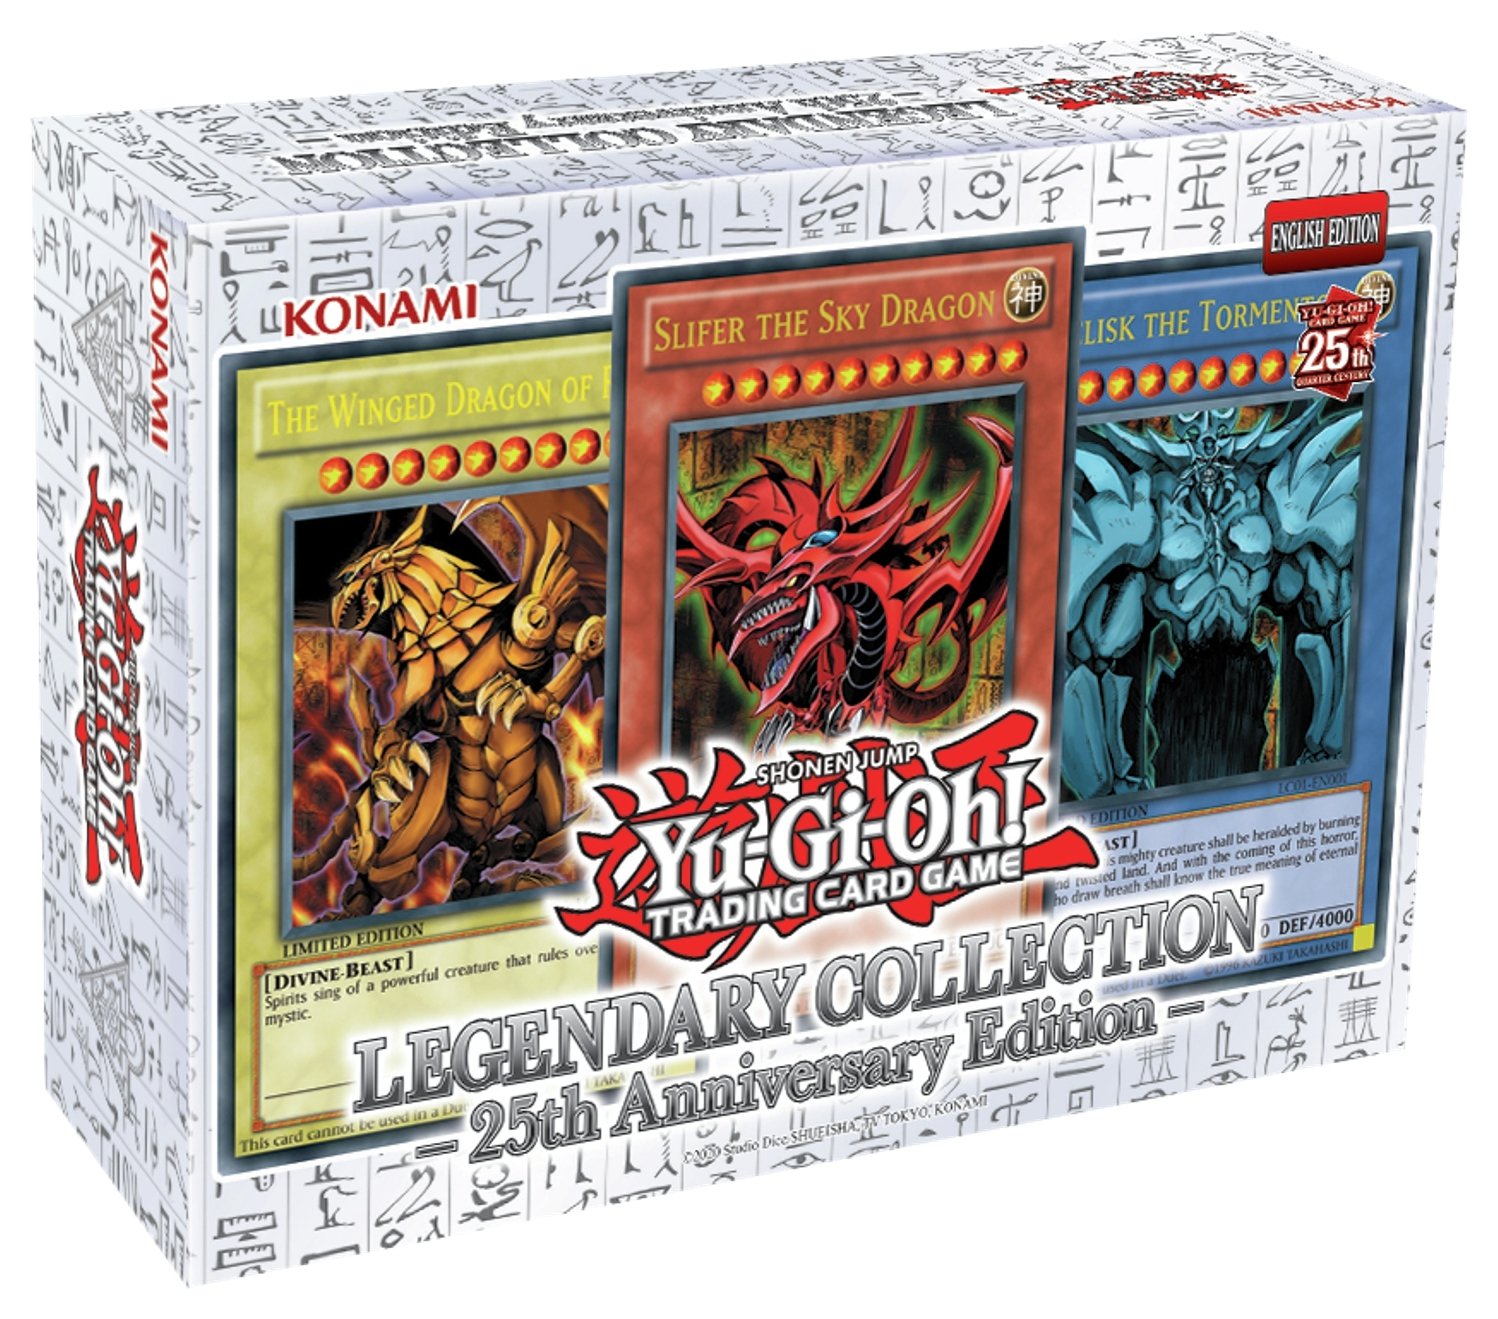 Yu-Gi-Oh Legendary Collection 25th Anniversary Card Game review